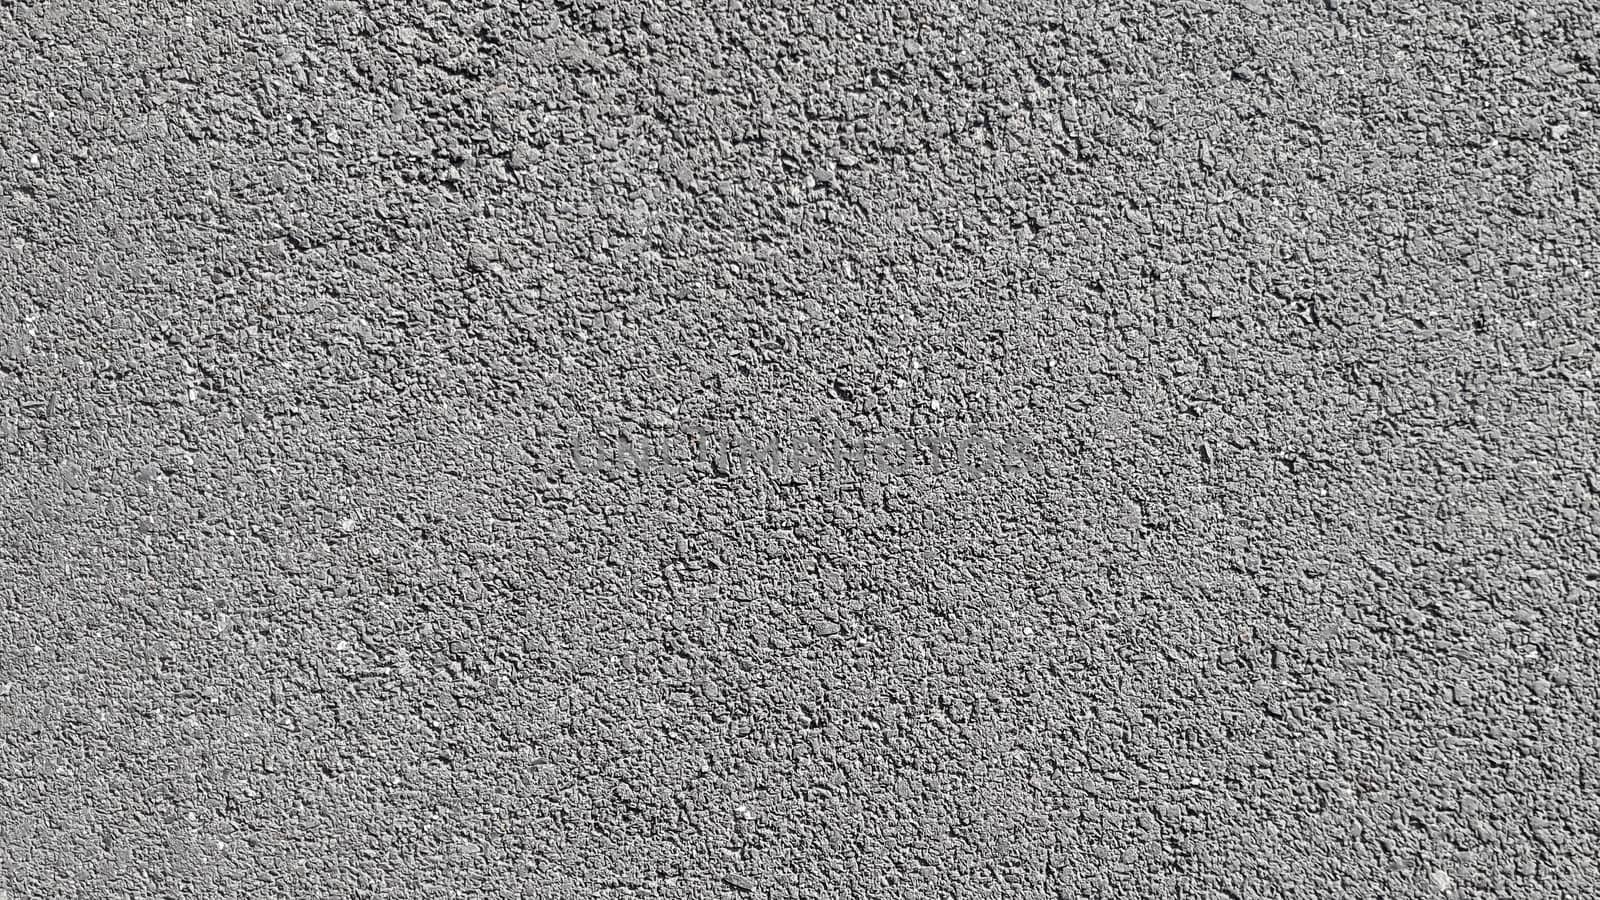 Full frame shot of a texture of gray concrete floor.